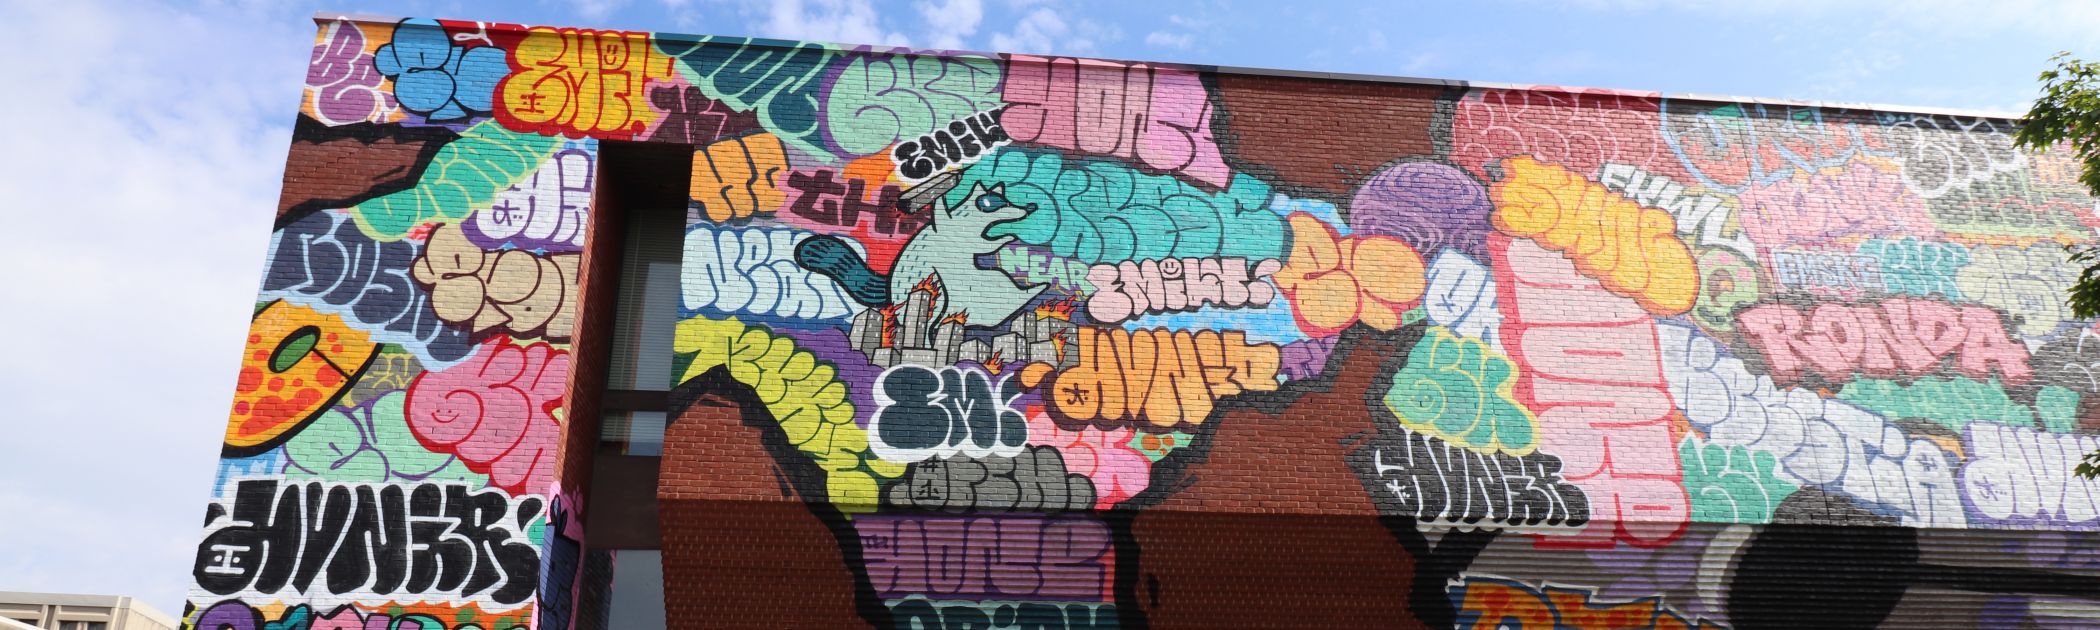 An exterior photograph of the Agnes Etherington Art Centre showing a brick wall covered in graffiti art